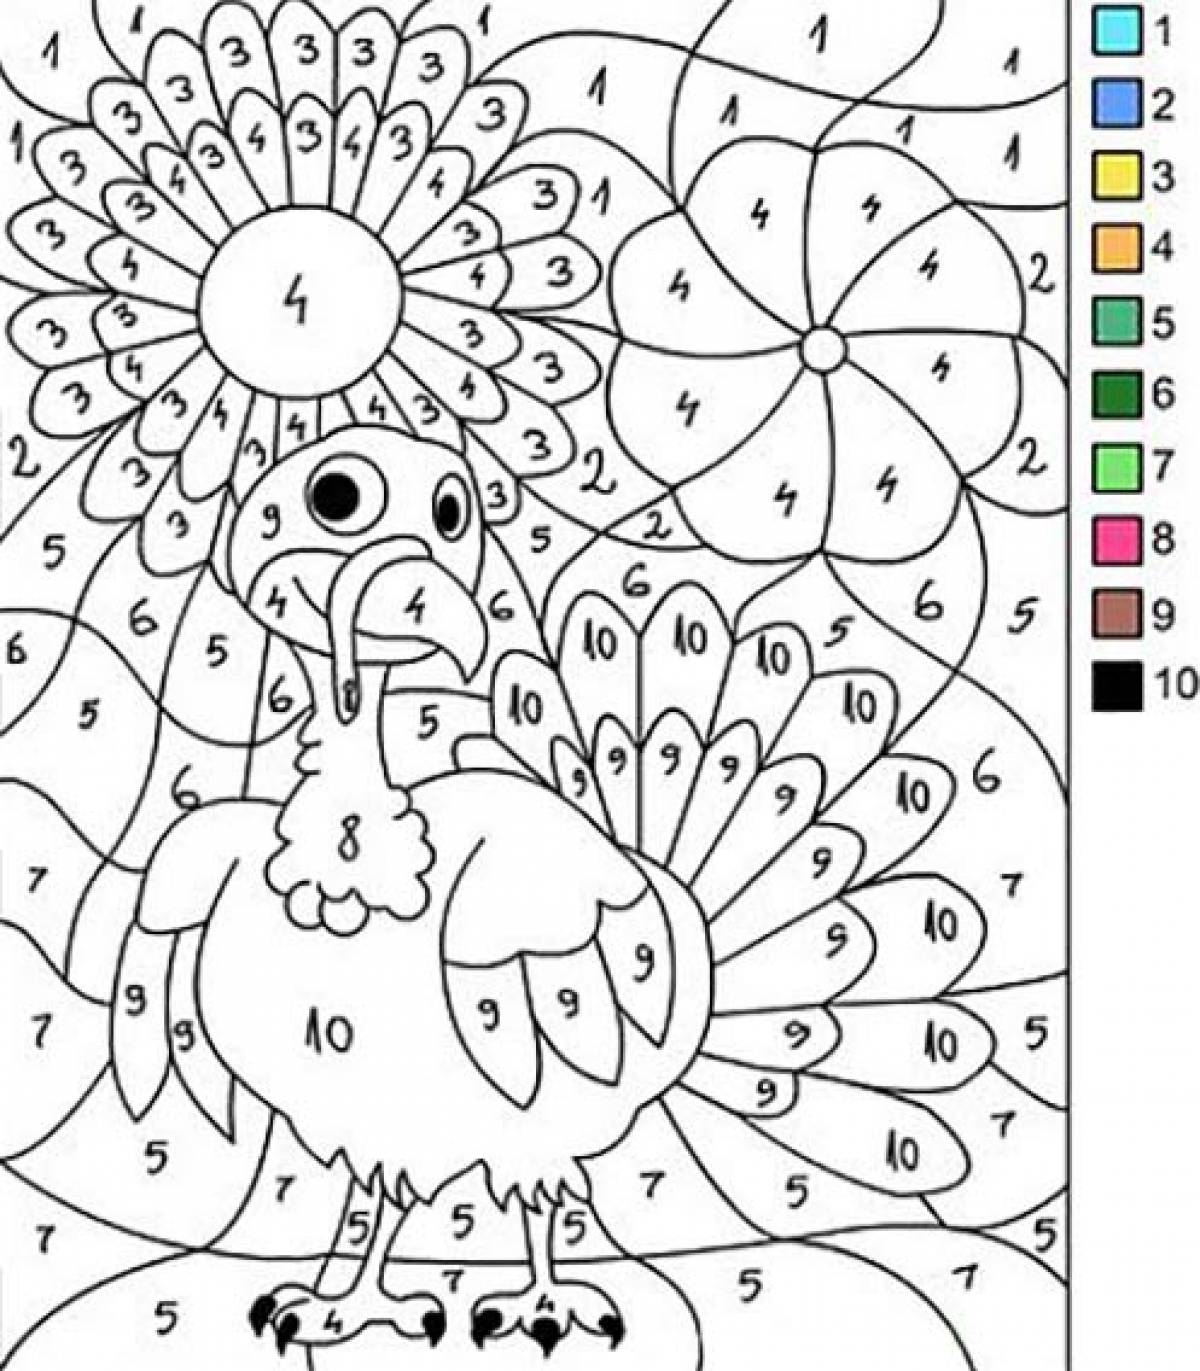 Coloring pages for grade 1 with examples of a turkey